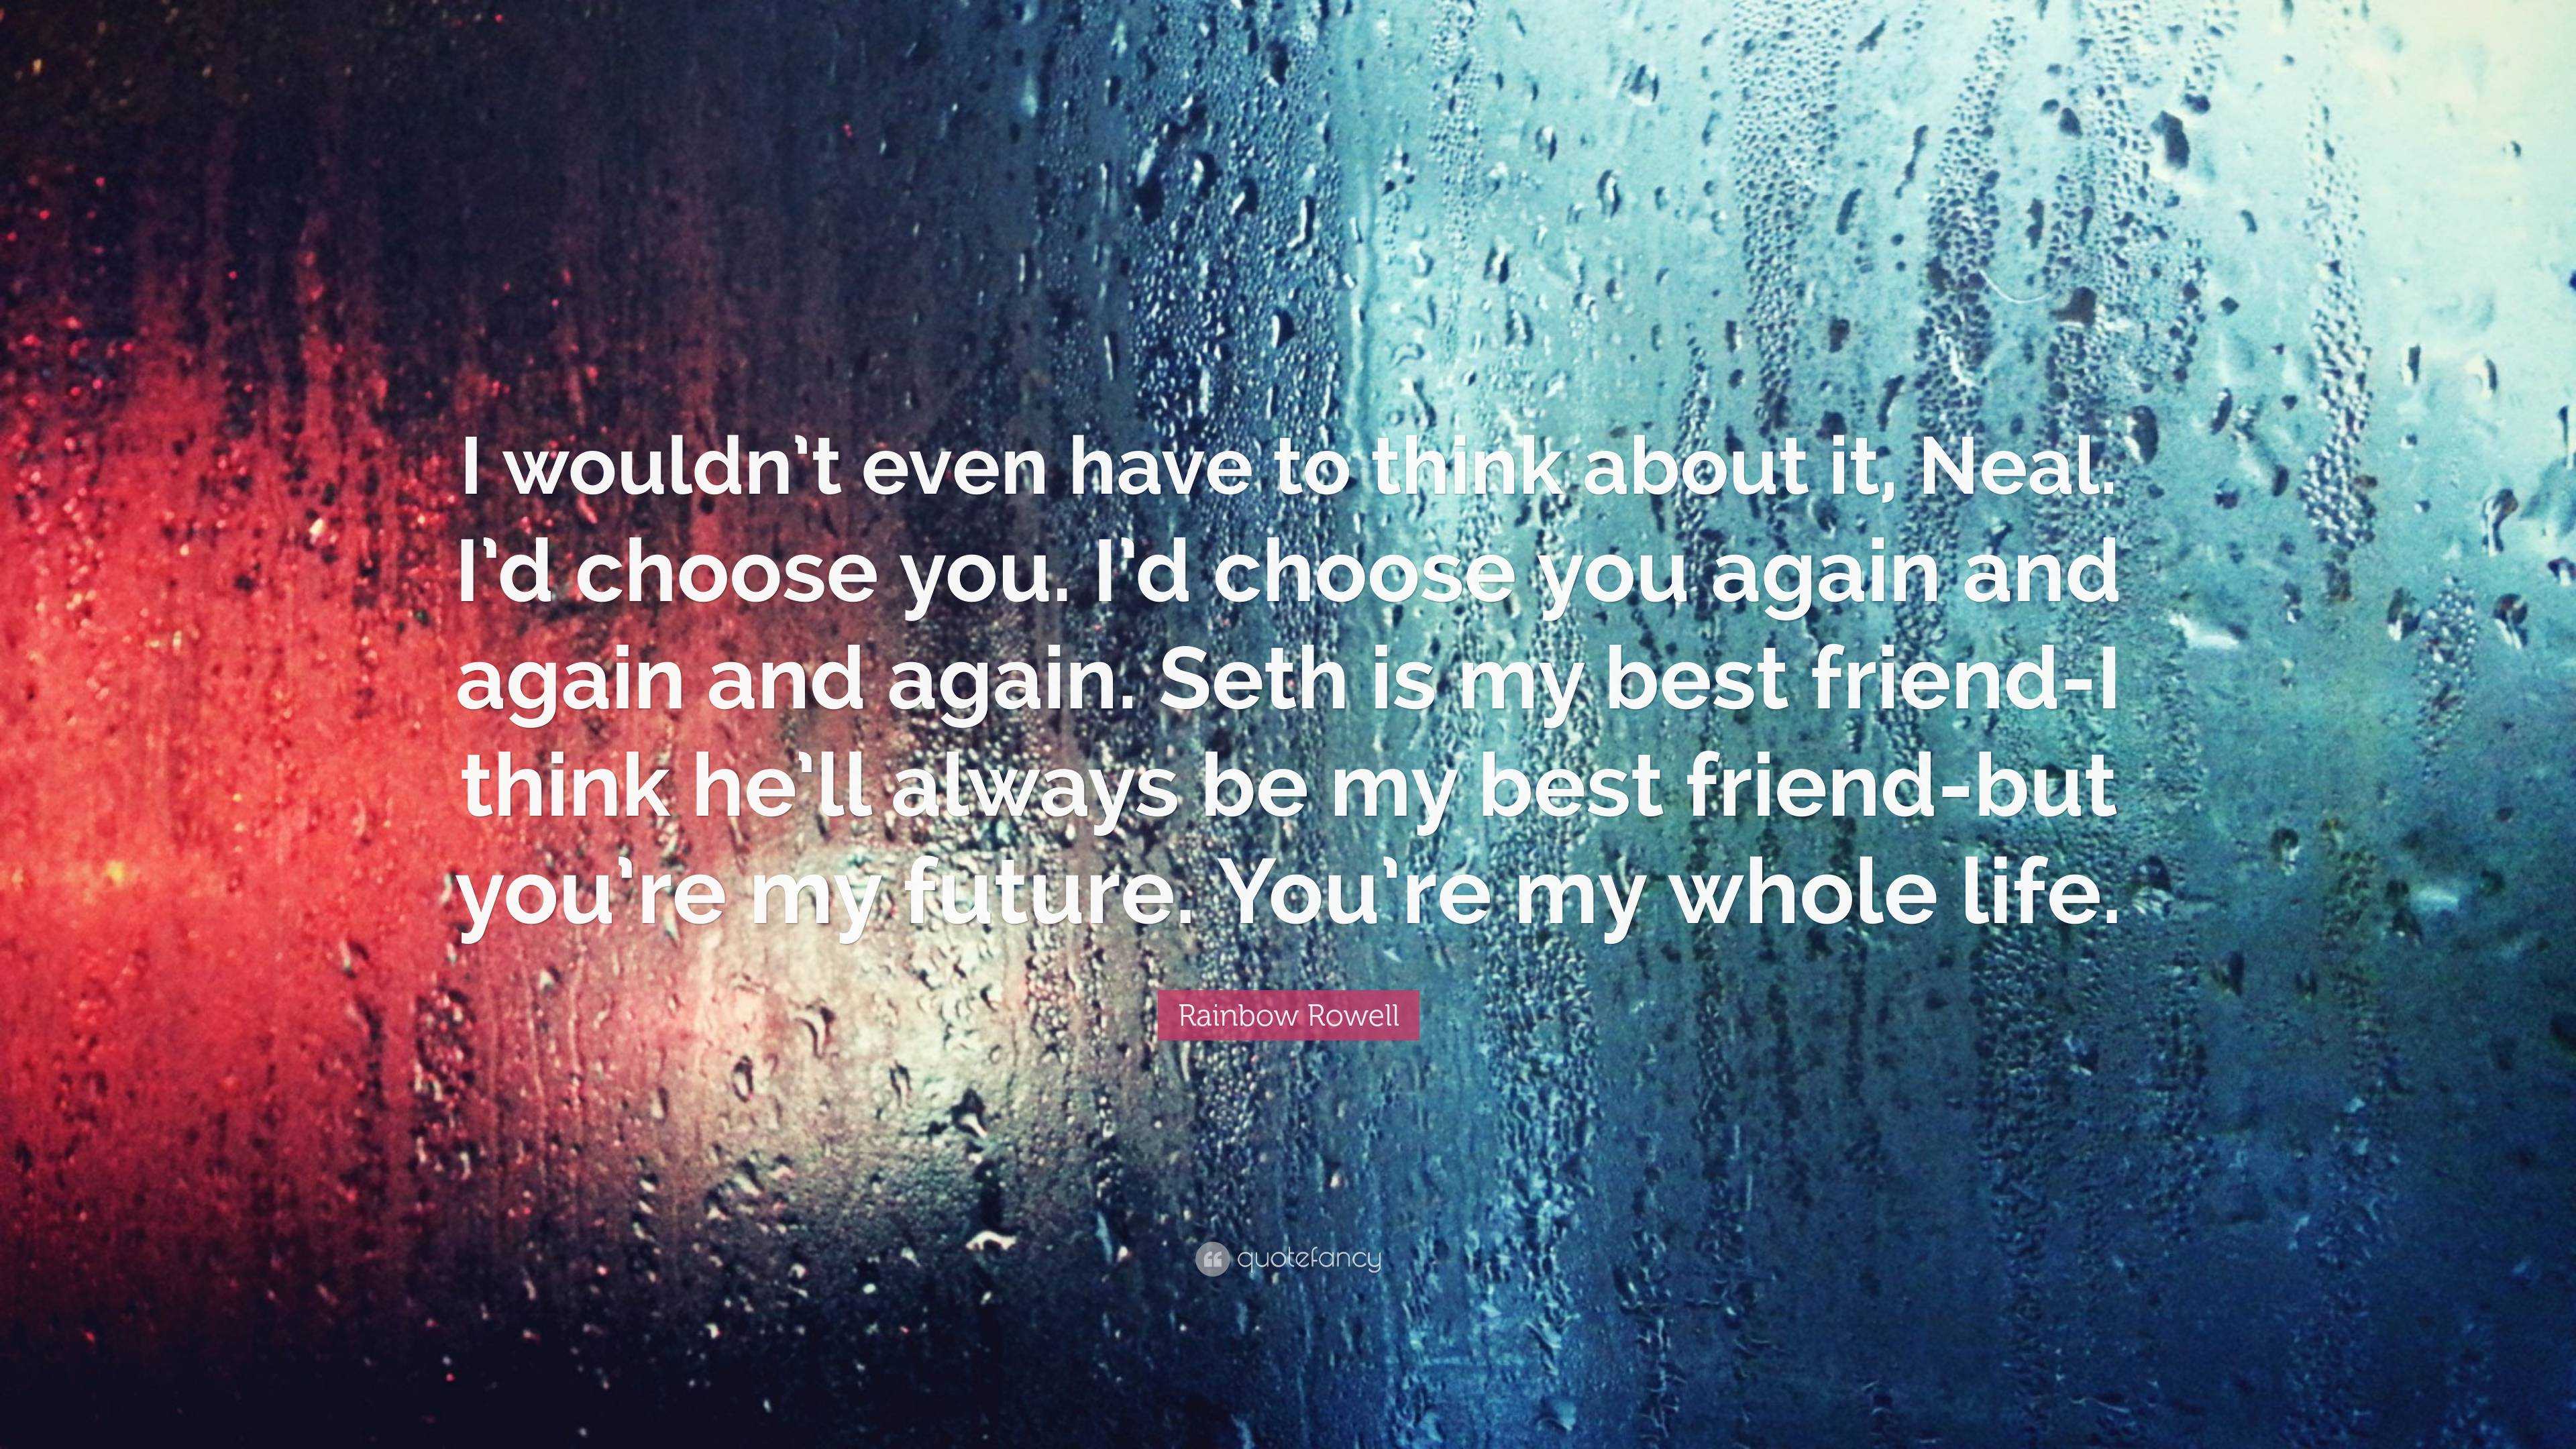 Rainbow Rowell Quote: “I wouldn’t even have to think about it, Neal. I ...